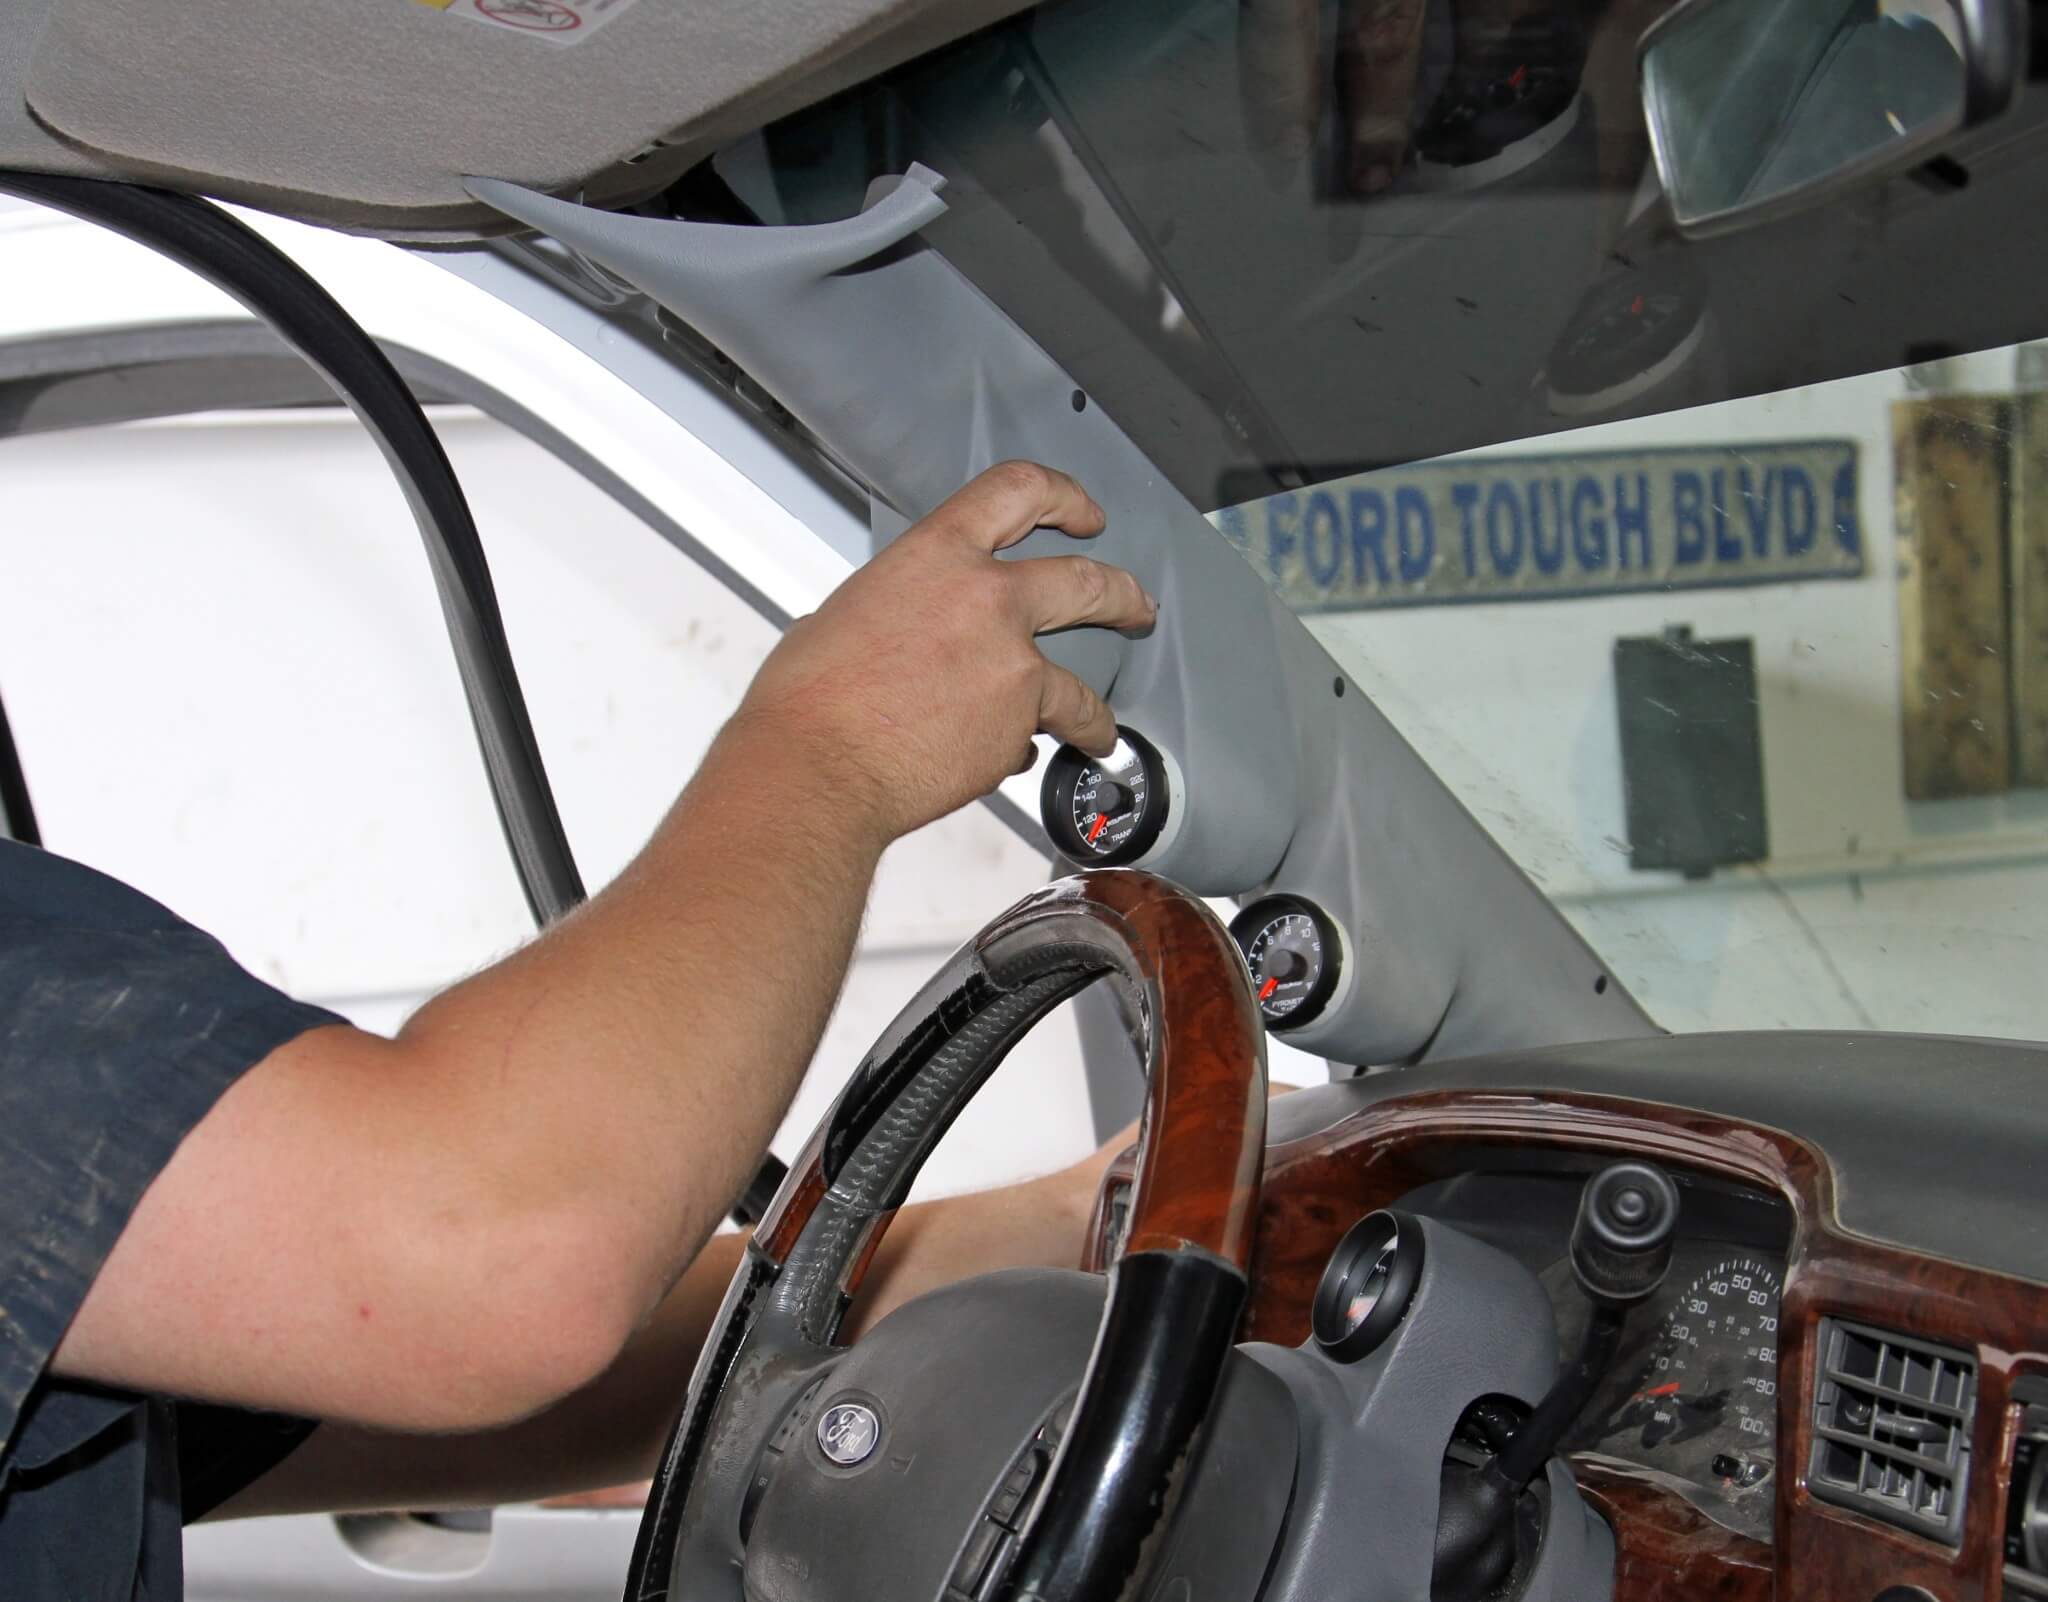 26. He then routes the harnesses through the A-pillar joint near the dash and installs the pod. He adjusts the angle of the gauges and presses them fully into the pod once it’s installed to verify the angle from the driver’s seat.